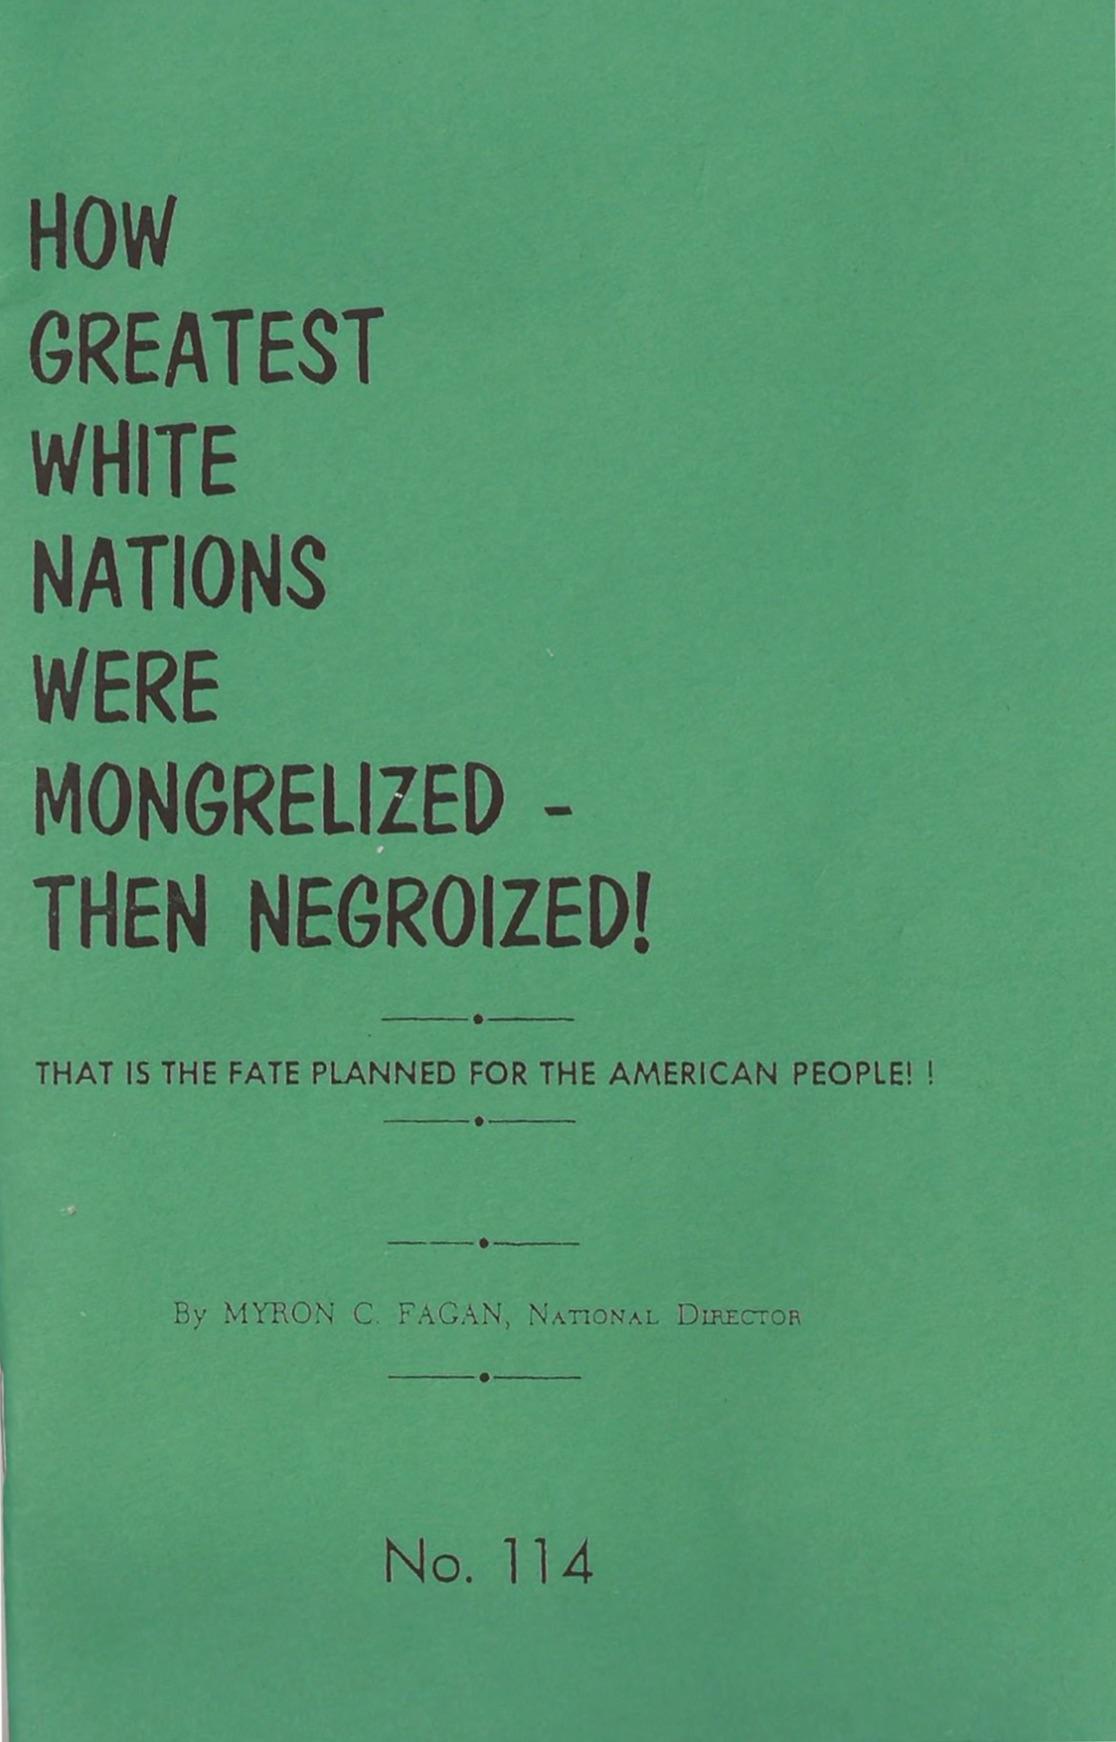 How Greatest White Nations were Mongrelized then Negroized (1965) by Myron Coureval Fagan